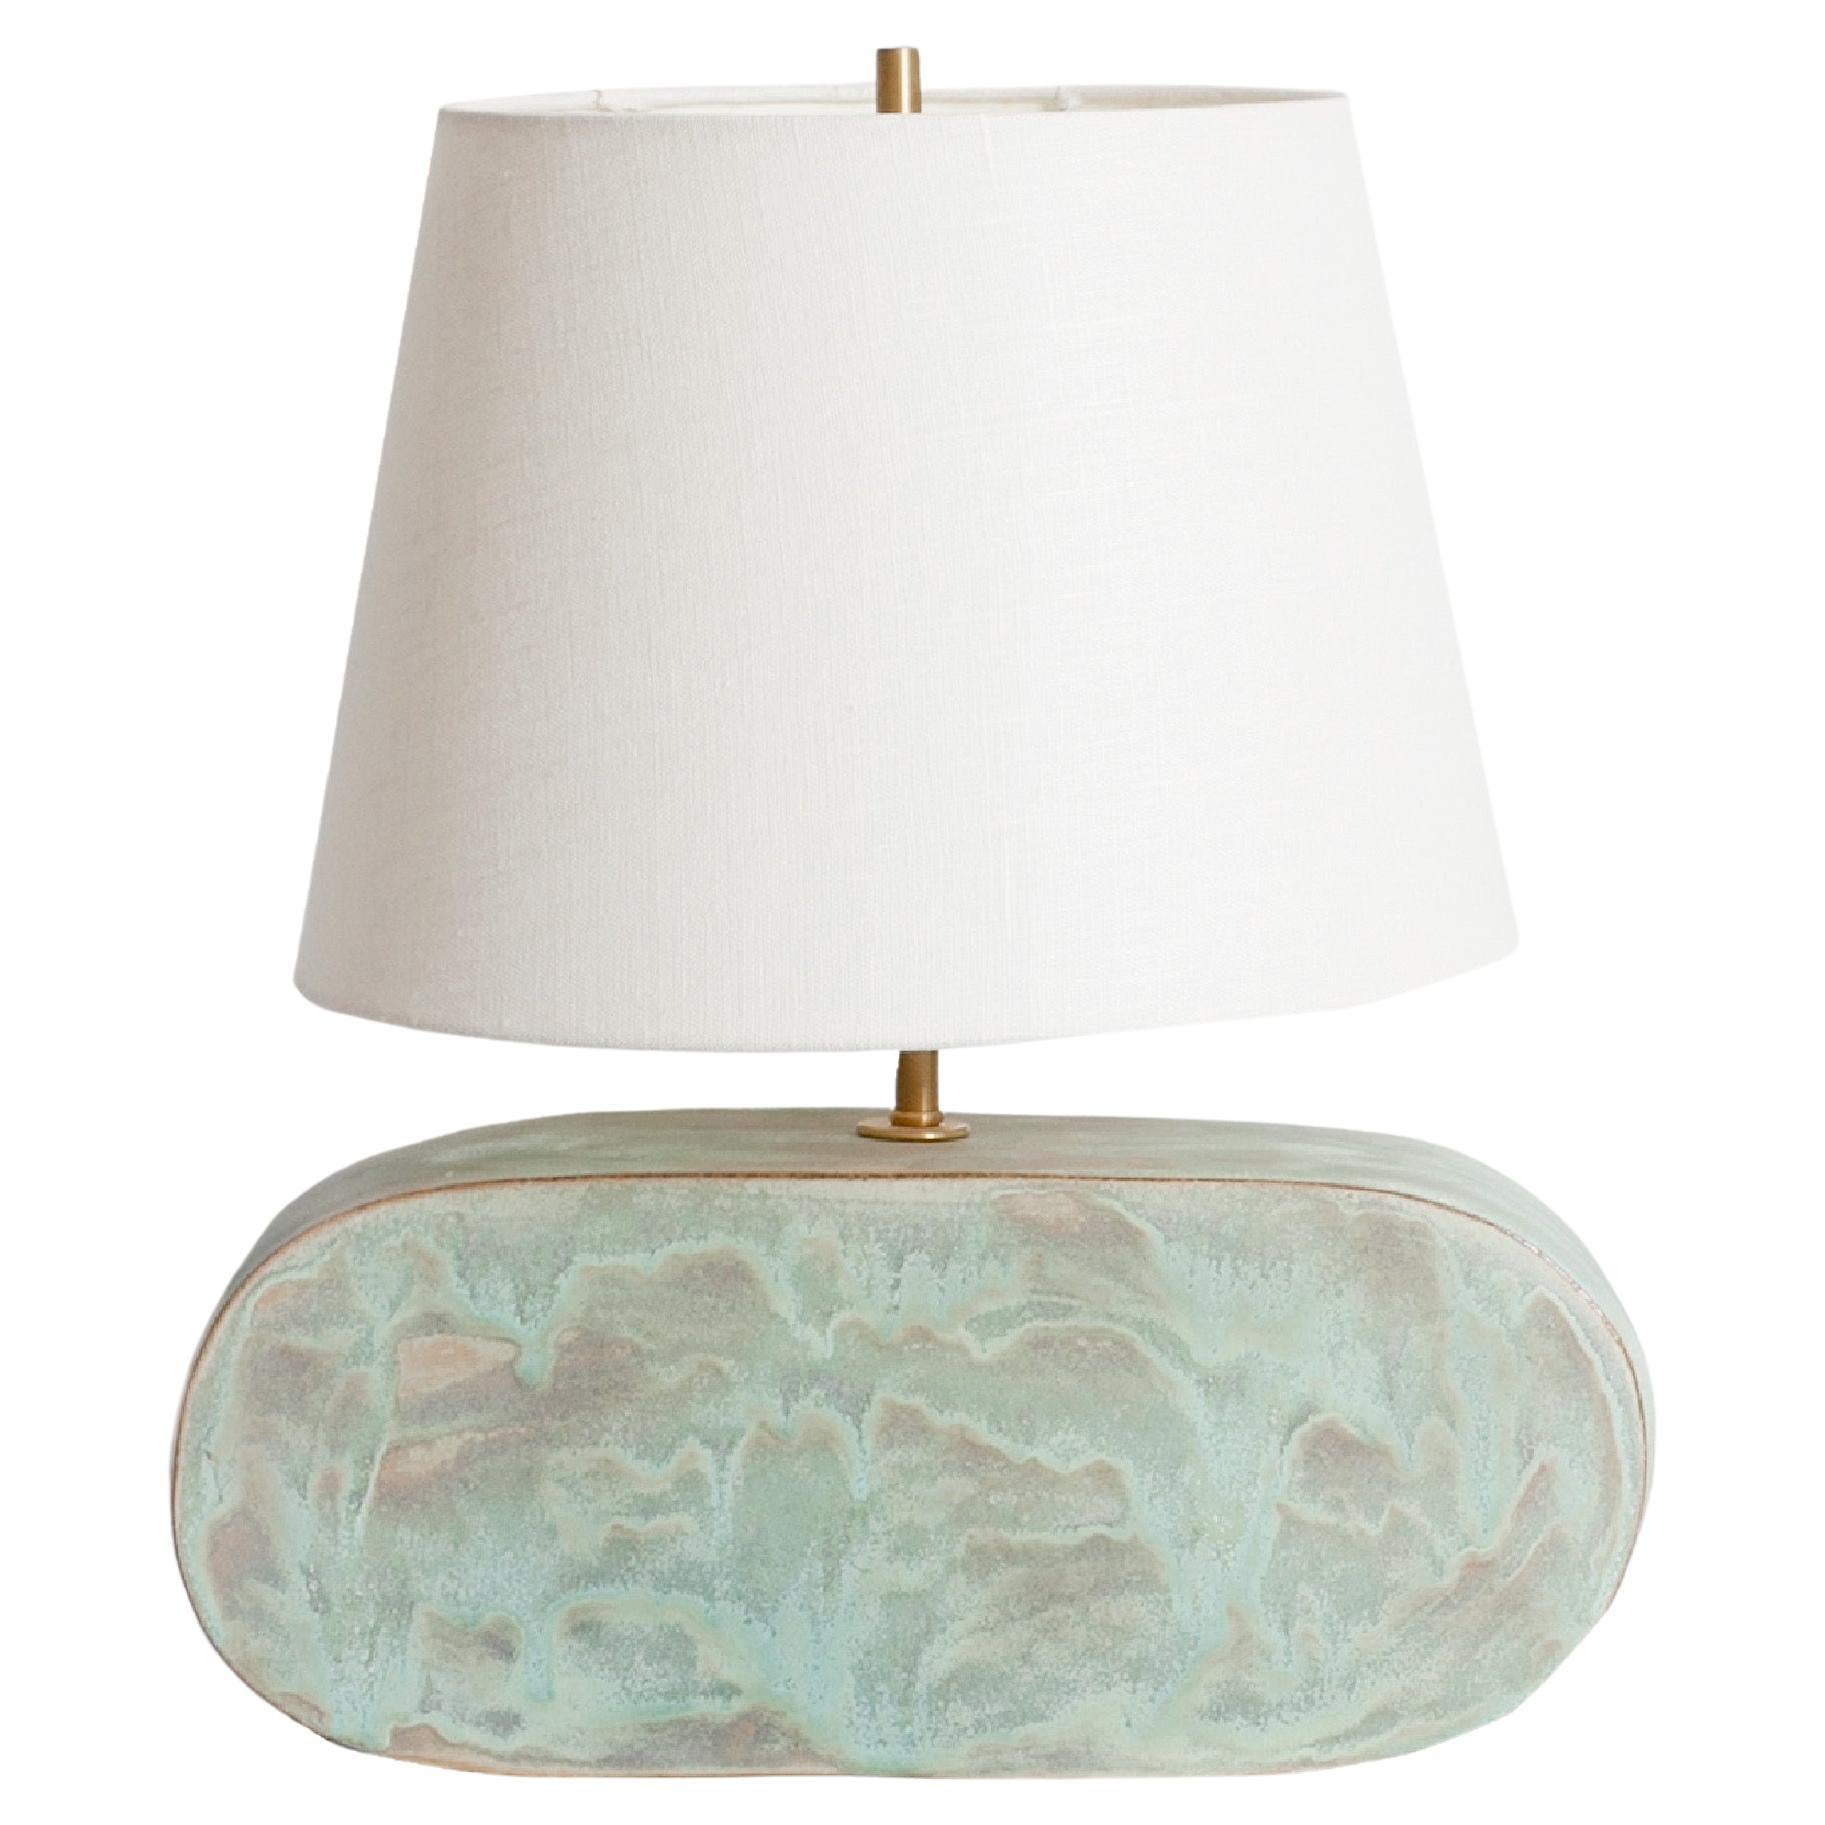 One of a kind ceramic lamp, hand built and assembled by hand. The lamp base is made with red clay manufactured regionally to the East Coast with custom made copper green glaze. This piece was inspired by seashells and smooth stones collected from